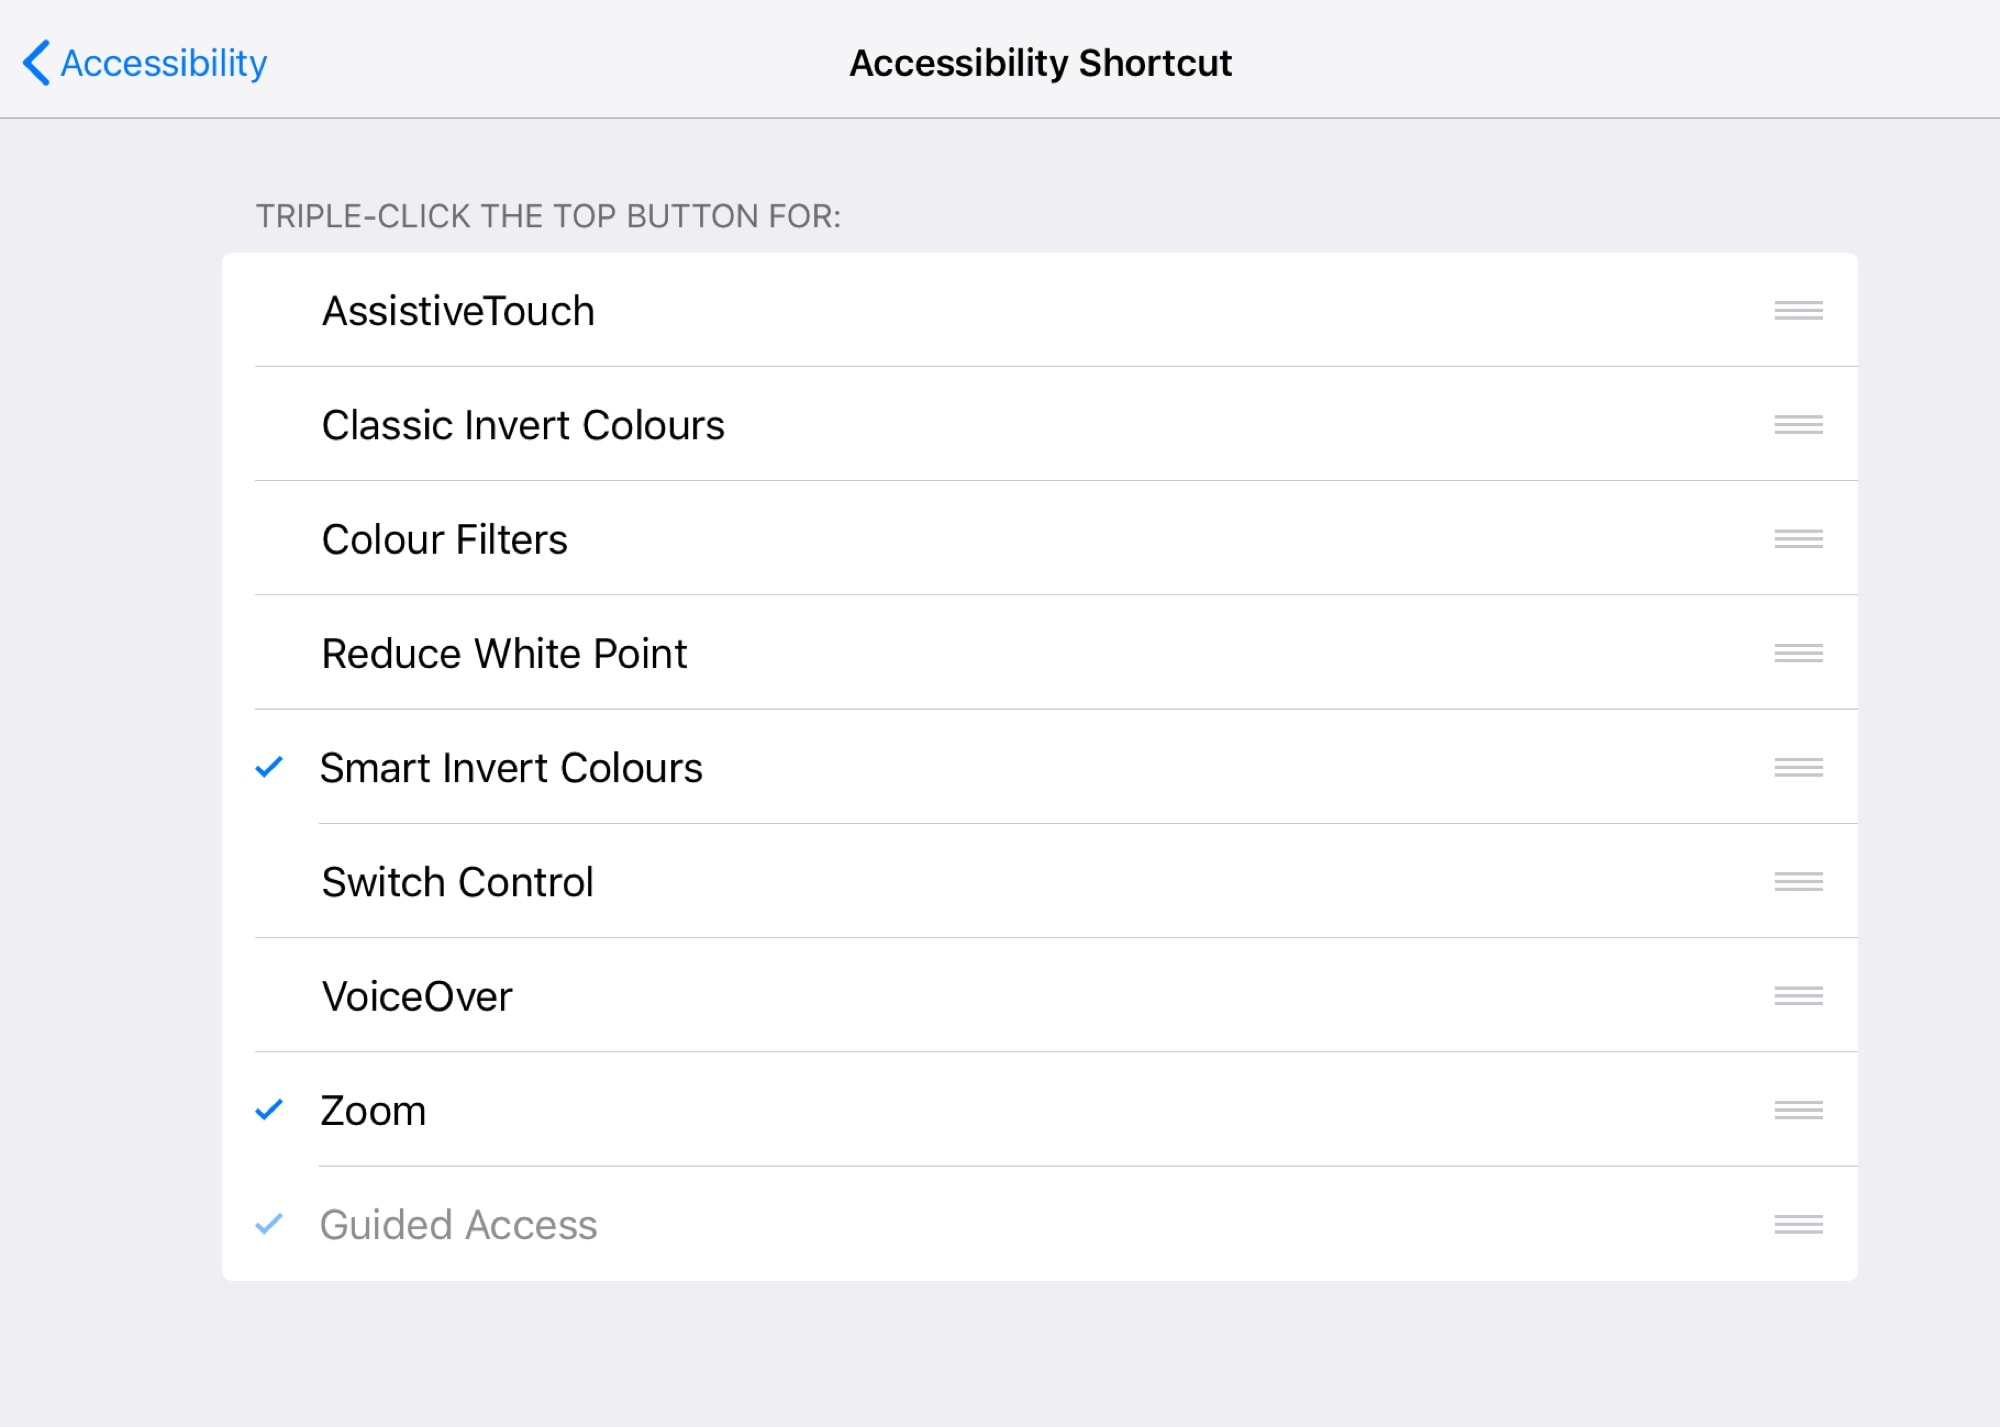 Your accessibility shortcuts.